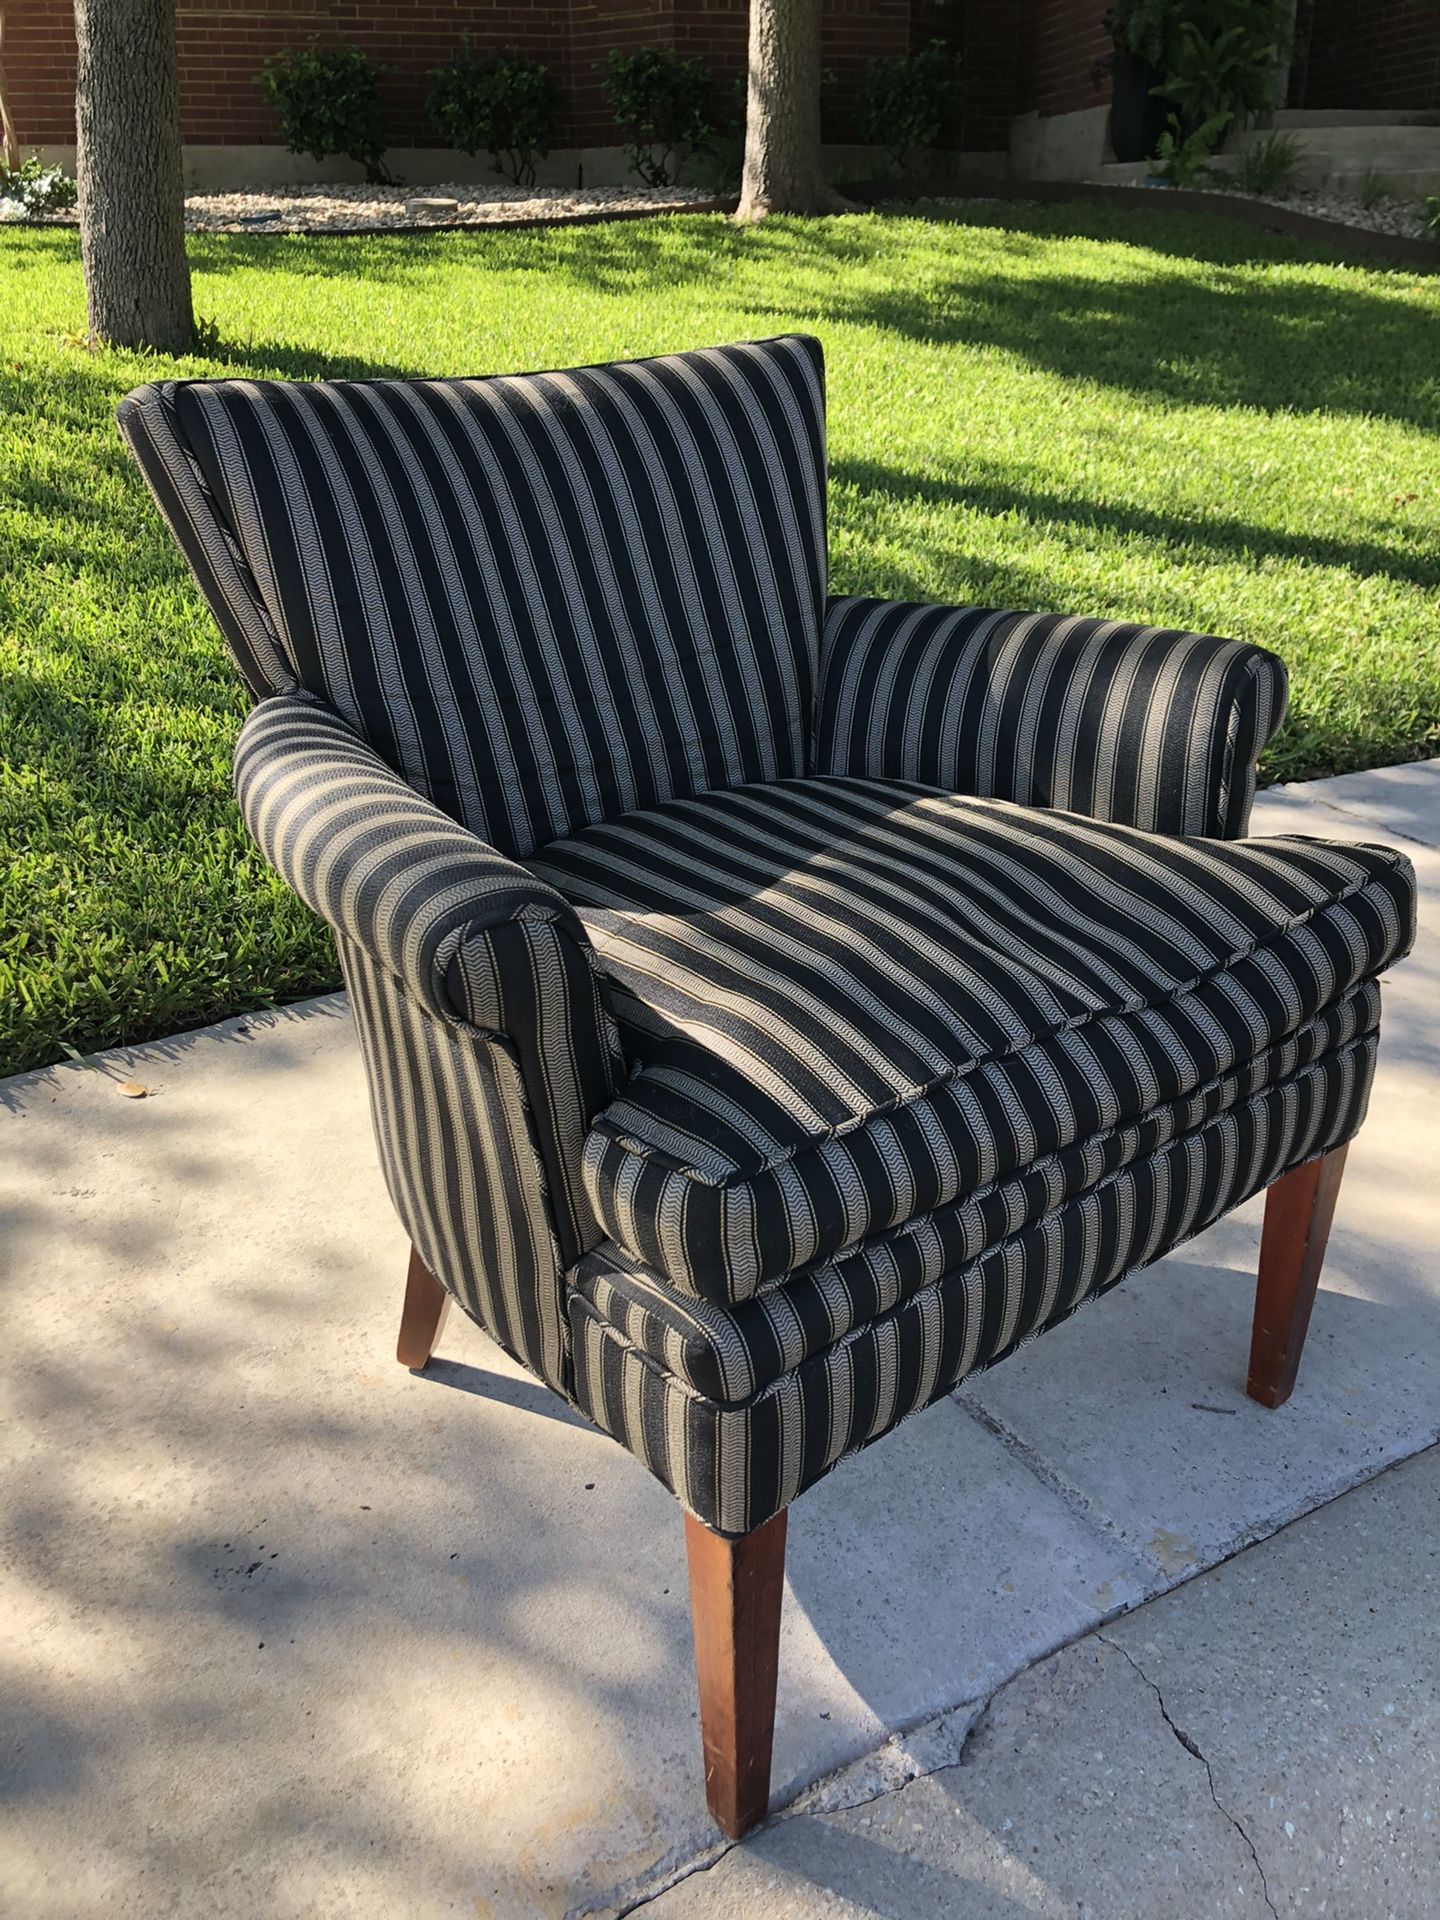 MOVING! Great chair only $40